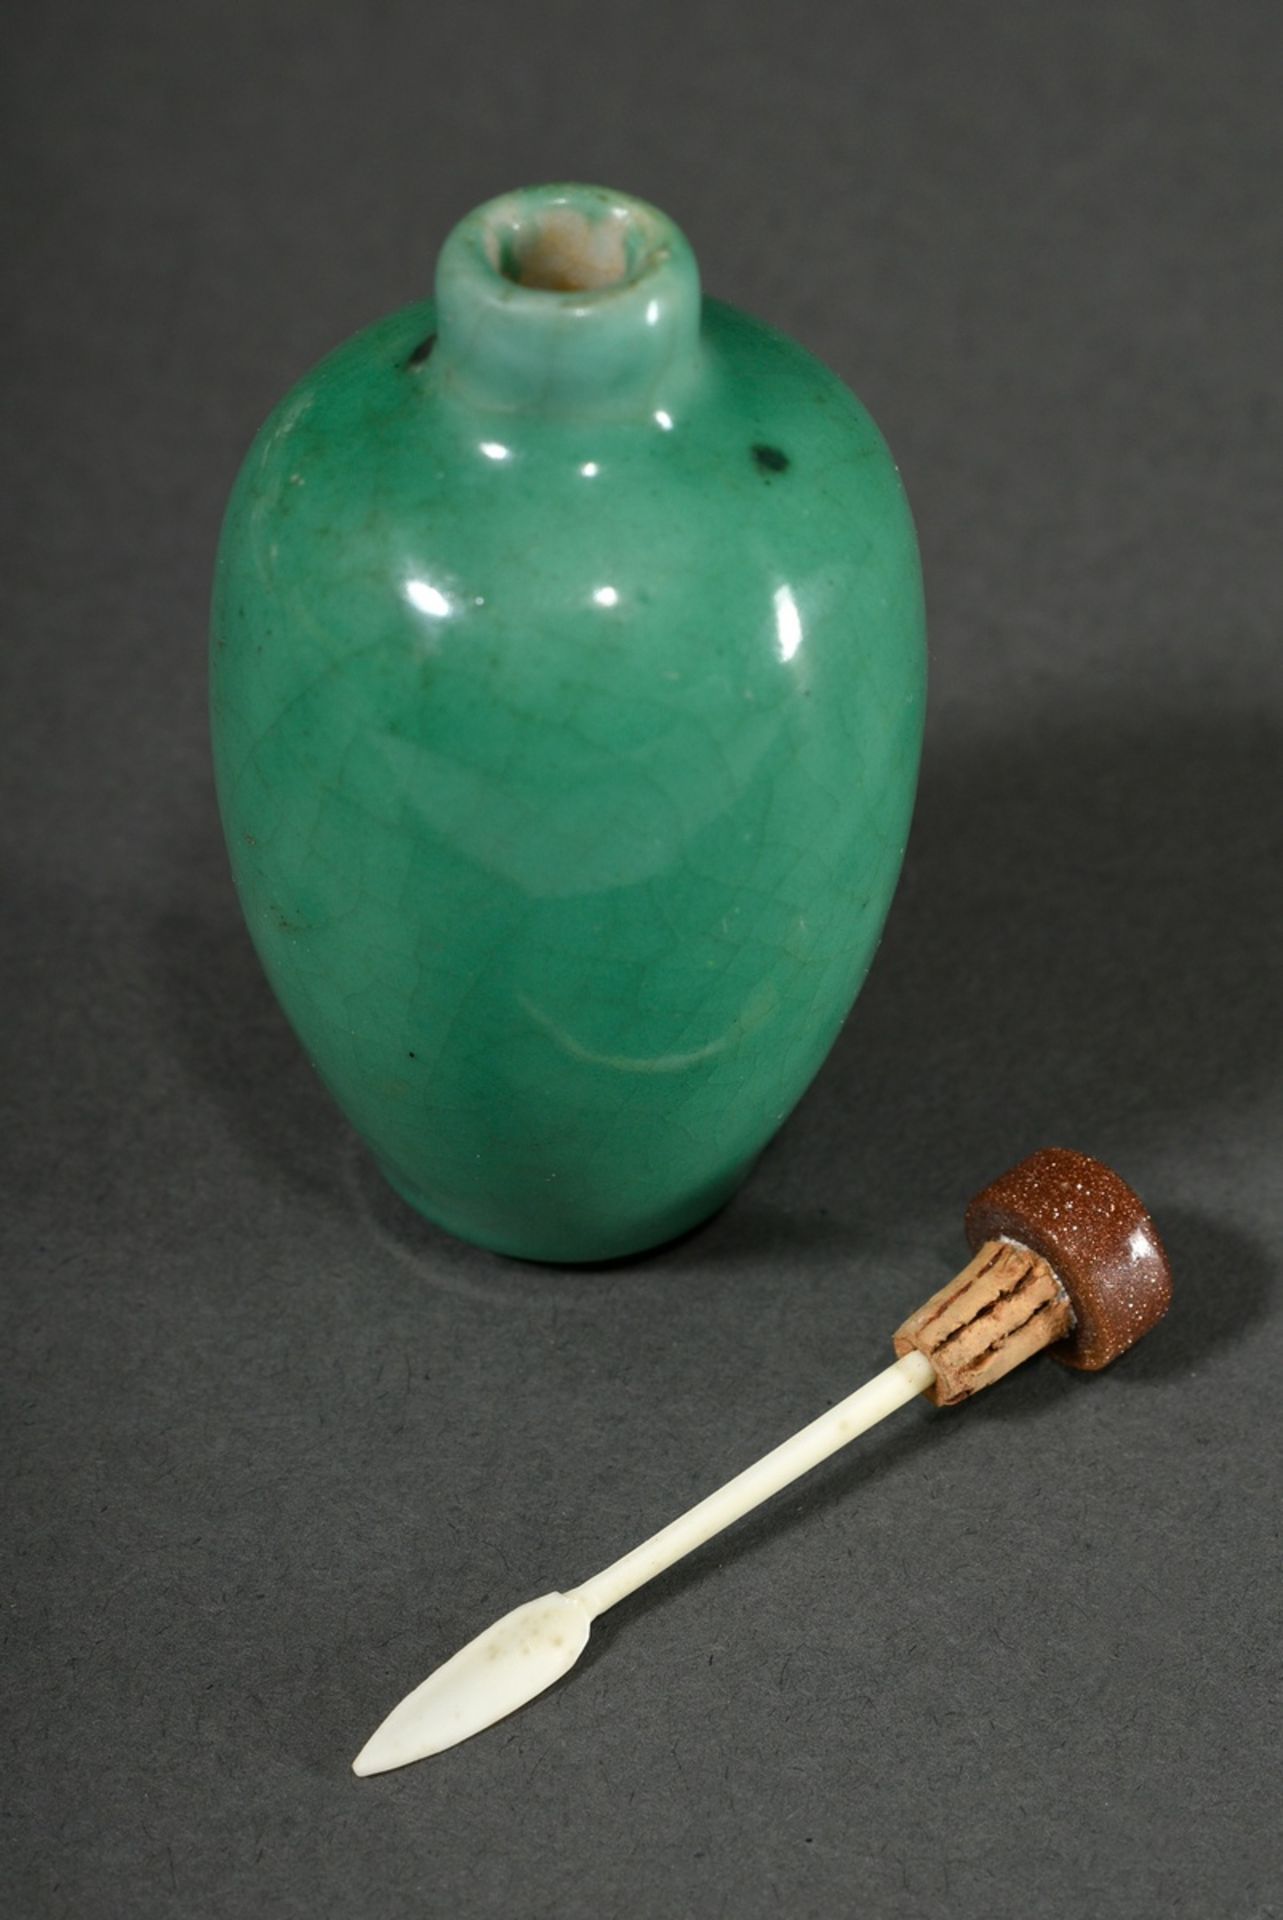 Porcelain snuffbottle with monochrome green glaze, China Qing Dynasty, h. 6,9cm - Image 3 of 4